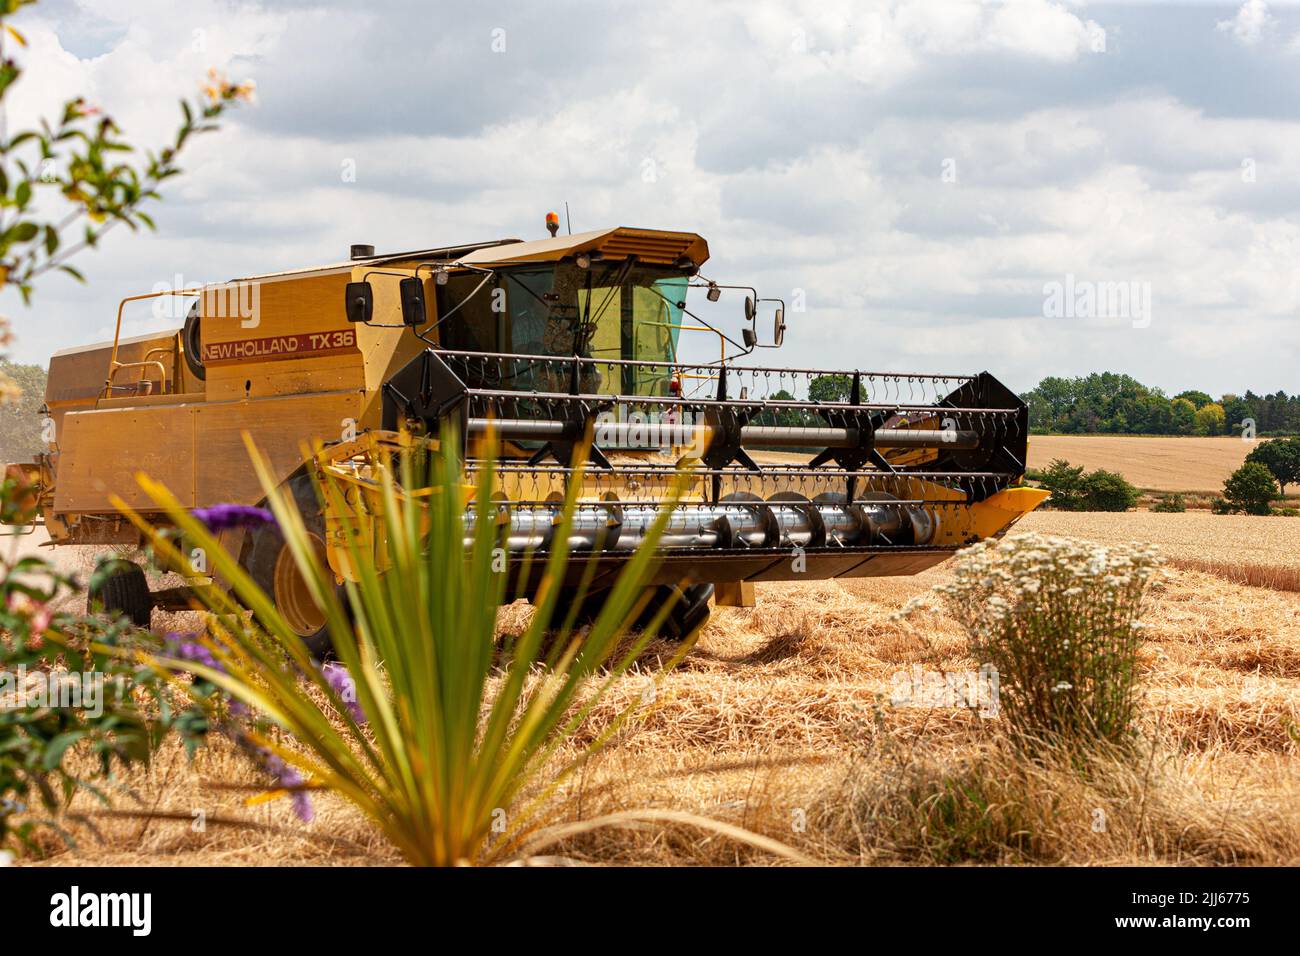 harvesting wheat in norfolk combine harvester new holland tx 36 Stock Photo